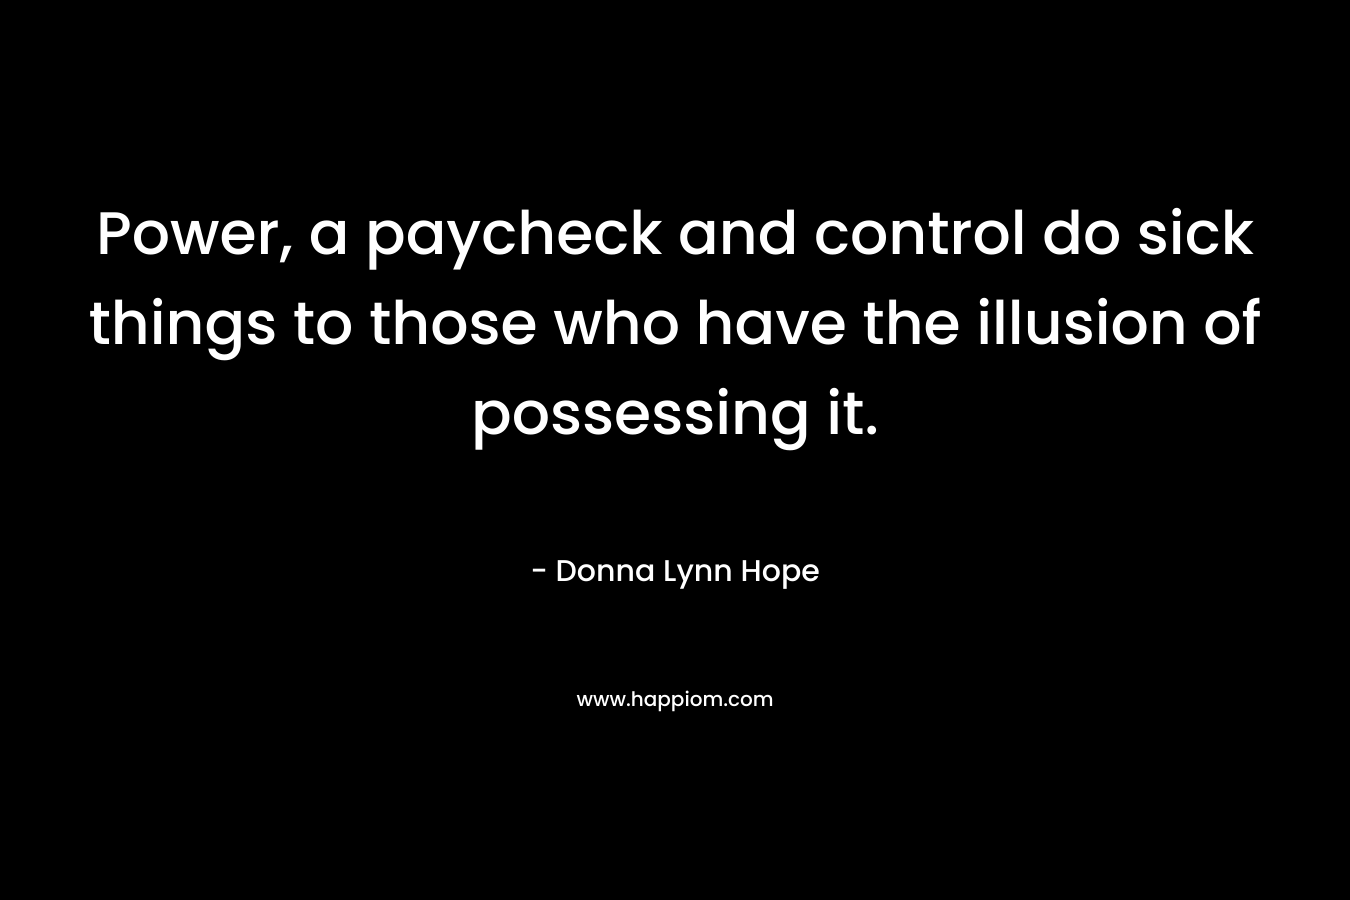 Power, a paycheck and control do sick things to those who have the illusion of possessing it. – Donna Lynn Hope